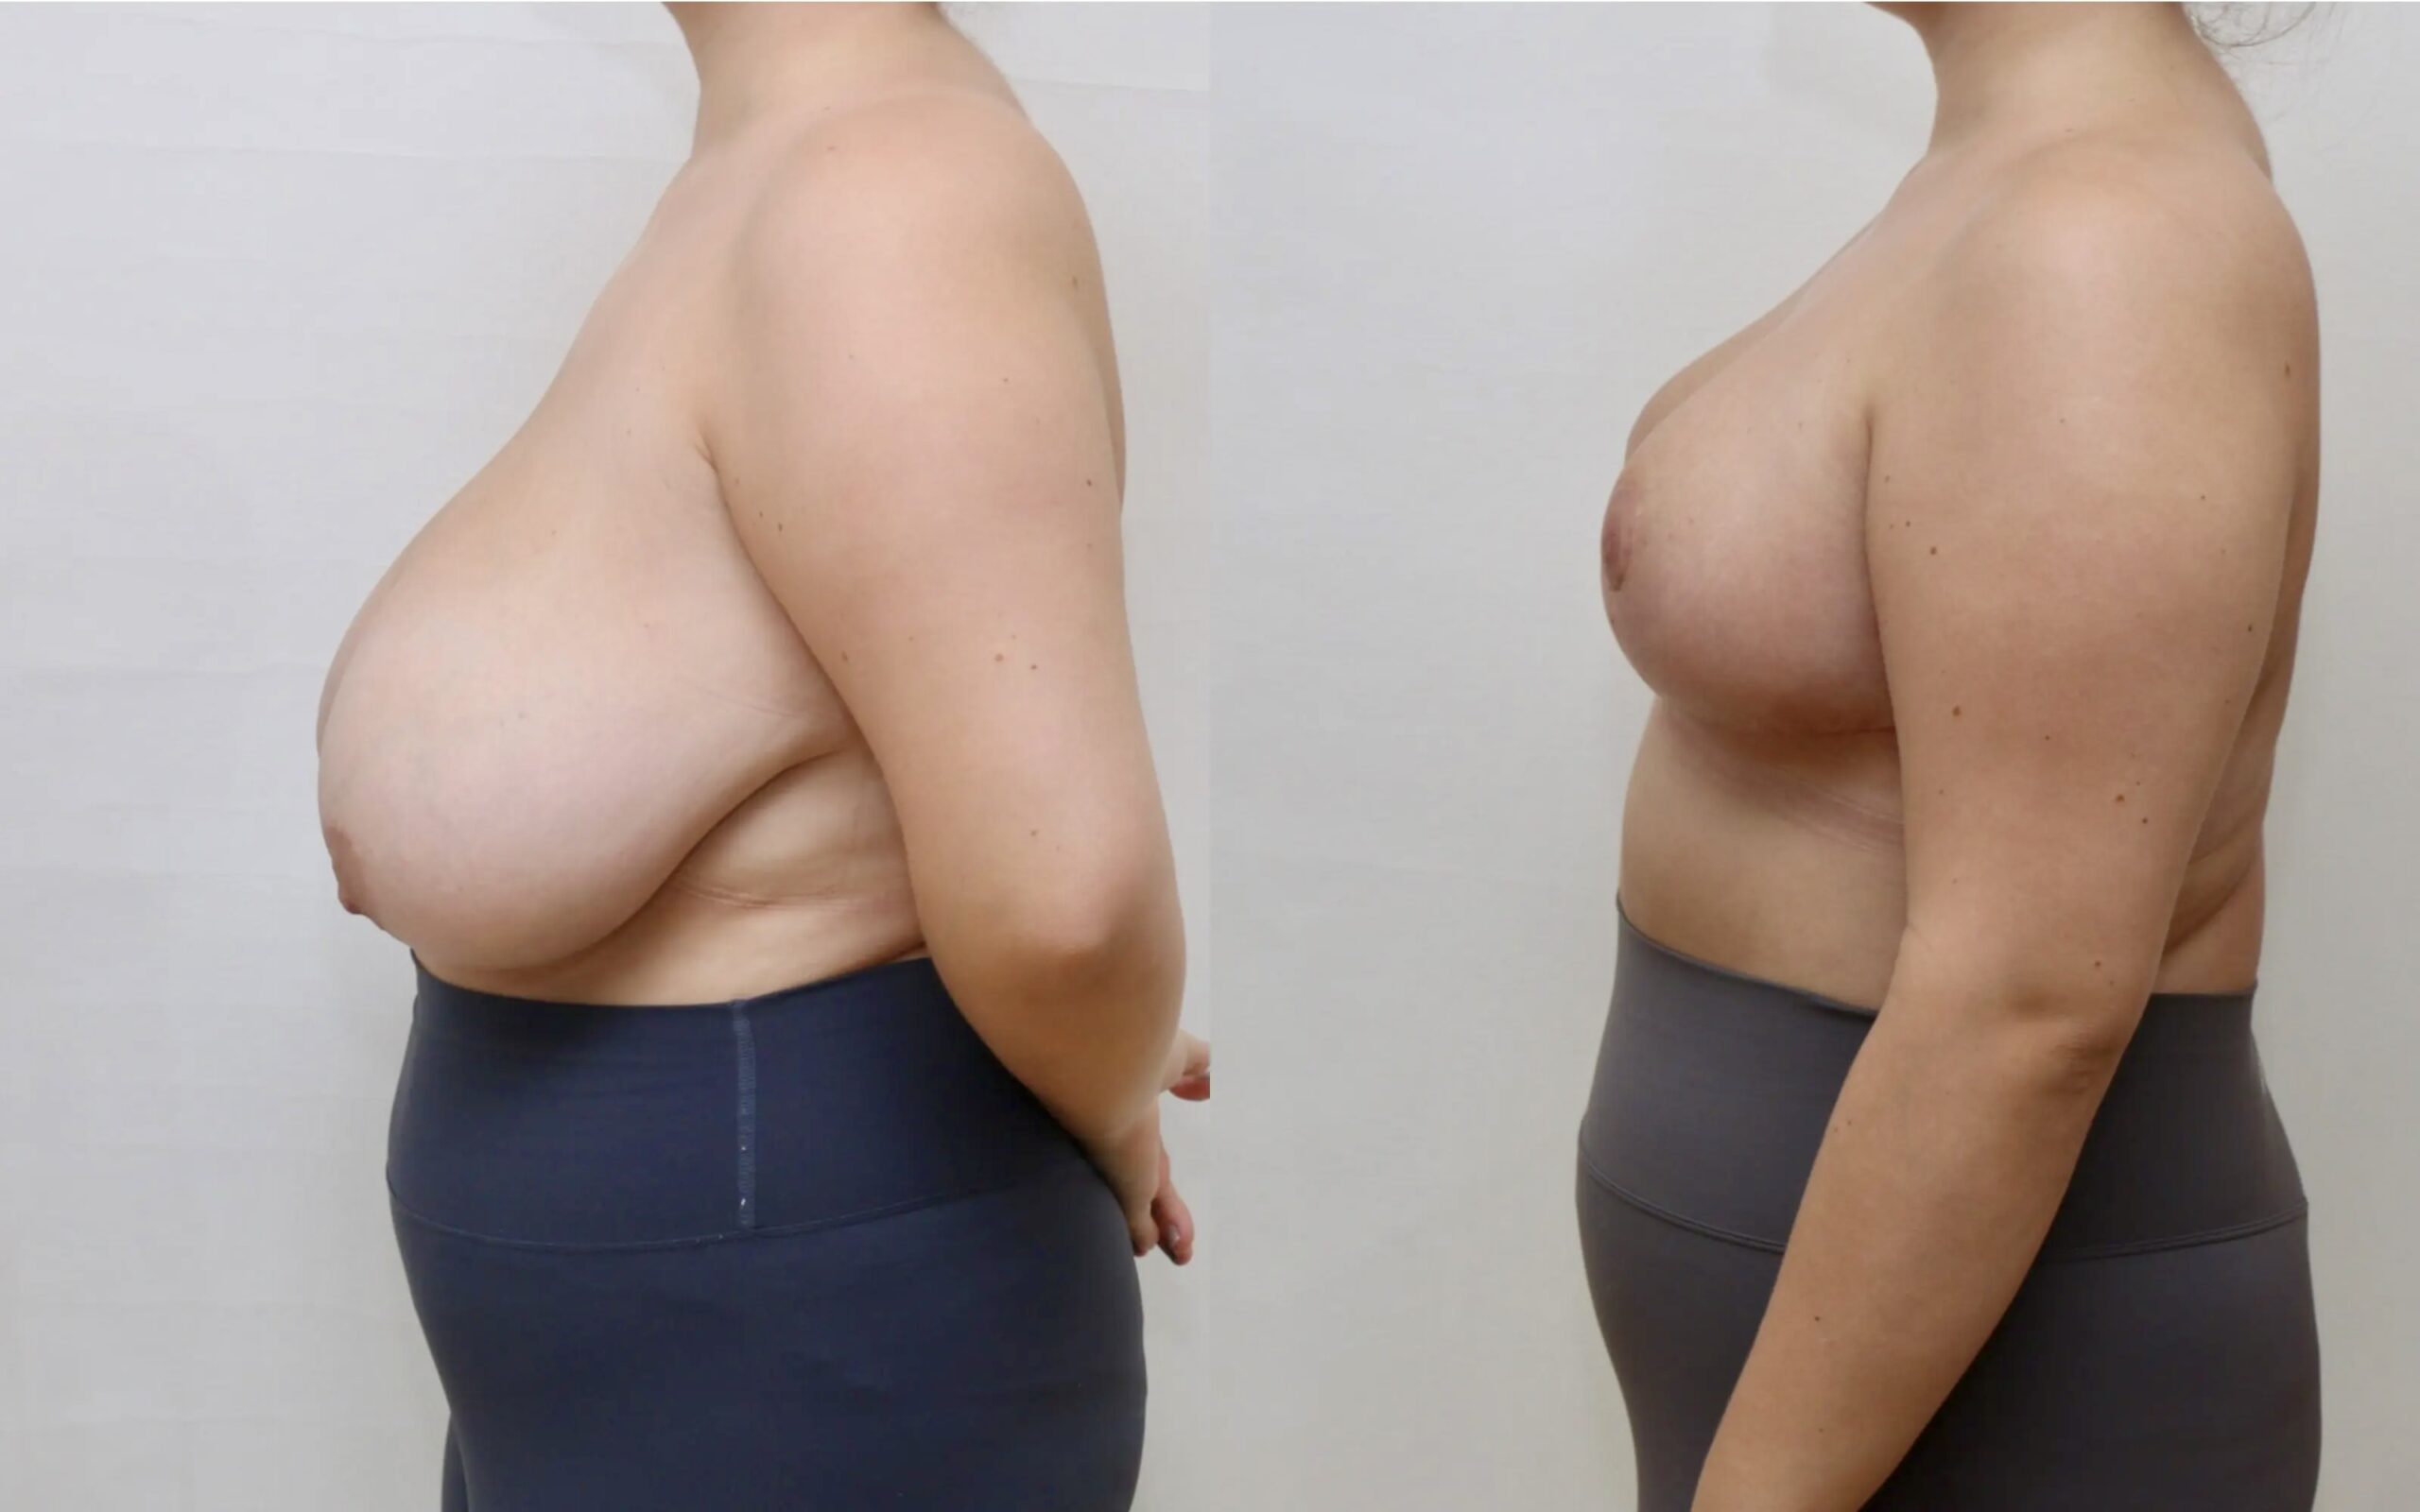 Breast reduction 4 weeks and 6 months post op